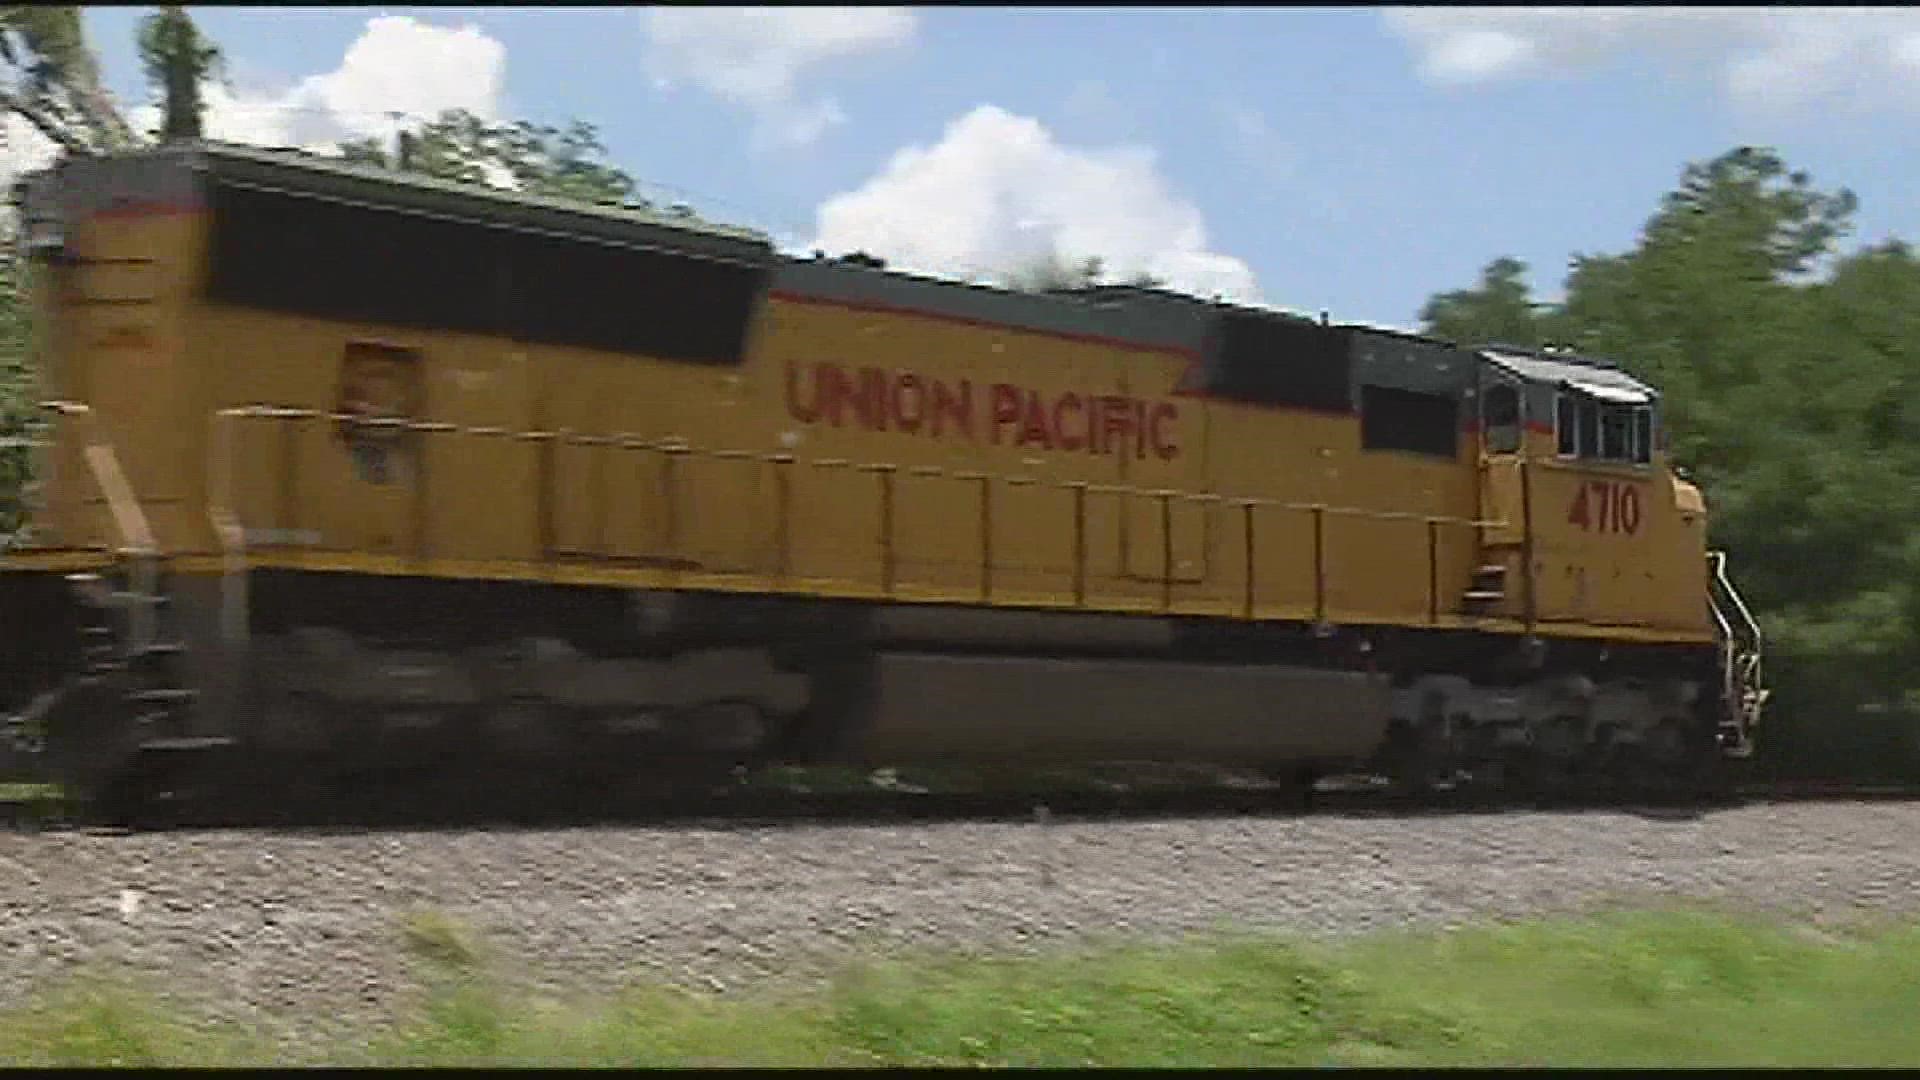 A passenger rail line connecting Baton Rouge to New Orleans could be on its way. The project is in the planning phases.